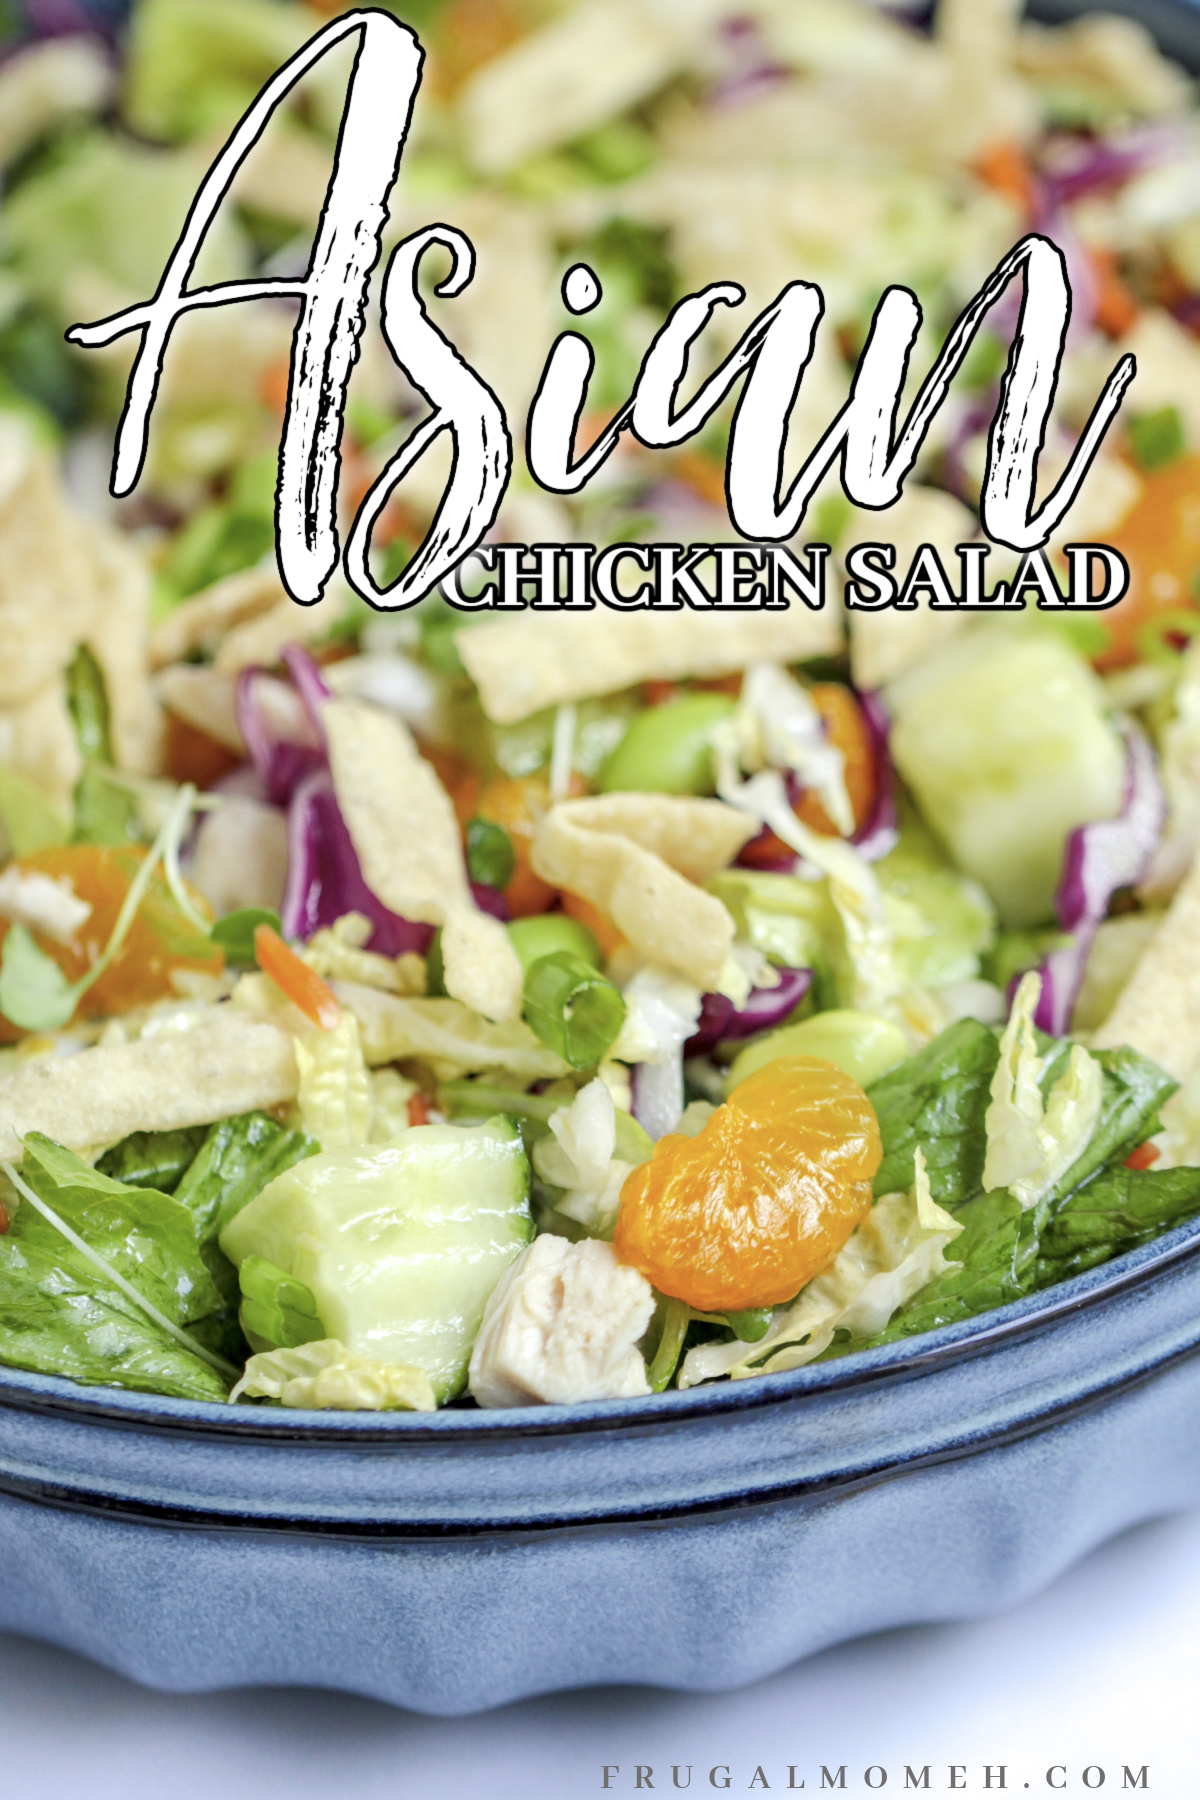 Spice up your salad game with this classic Asian chicken salad recipe; it's easy, delicious, and guaranteed to make dinnertime more exciting!